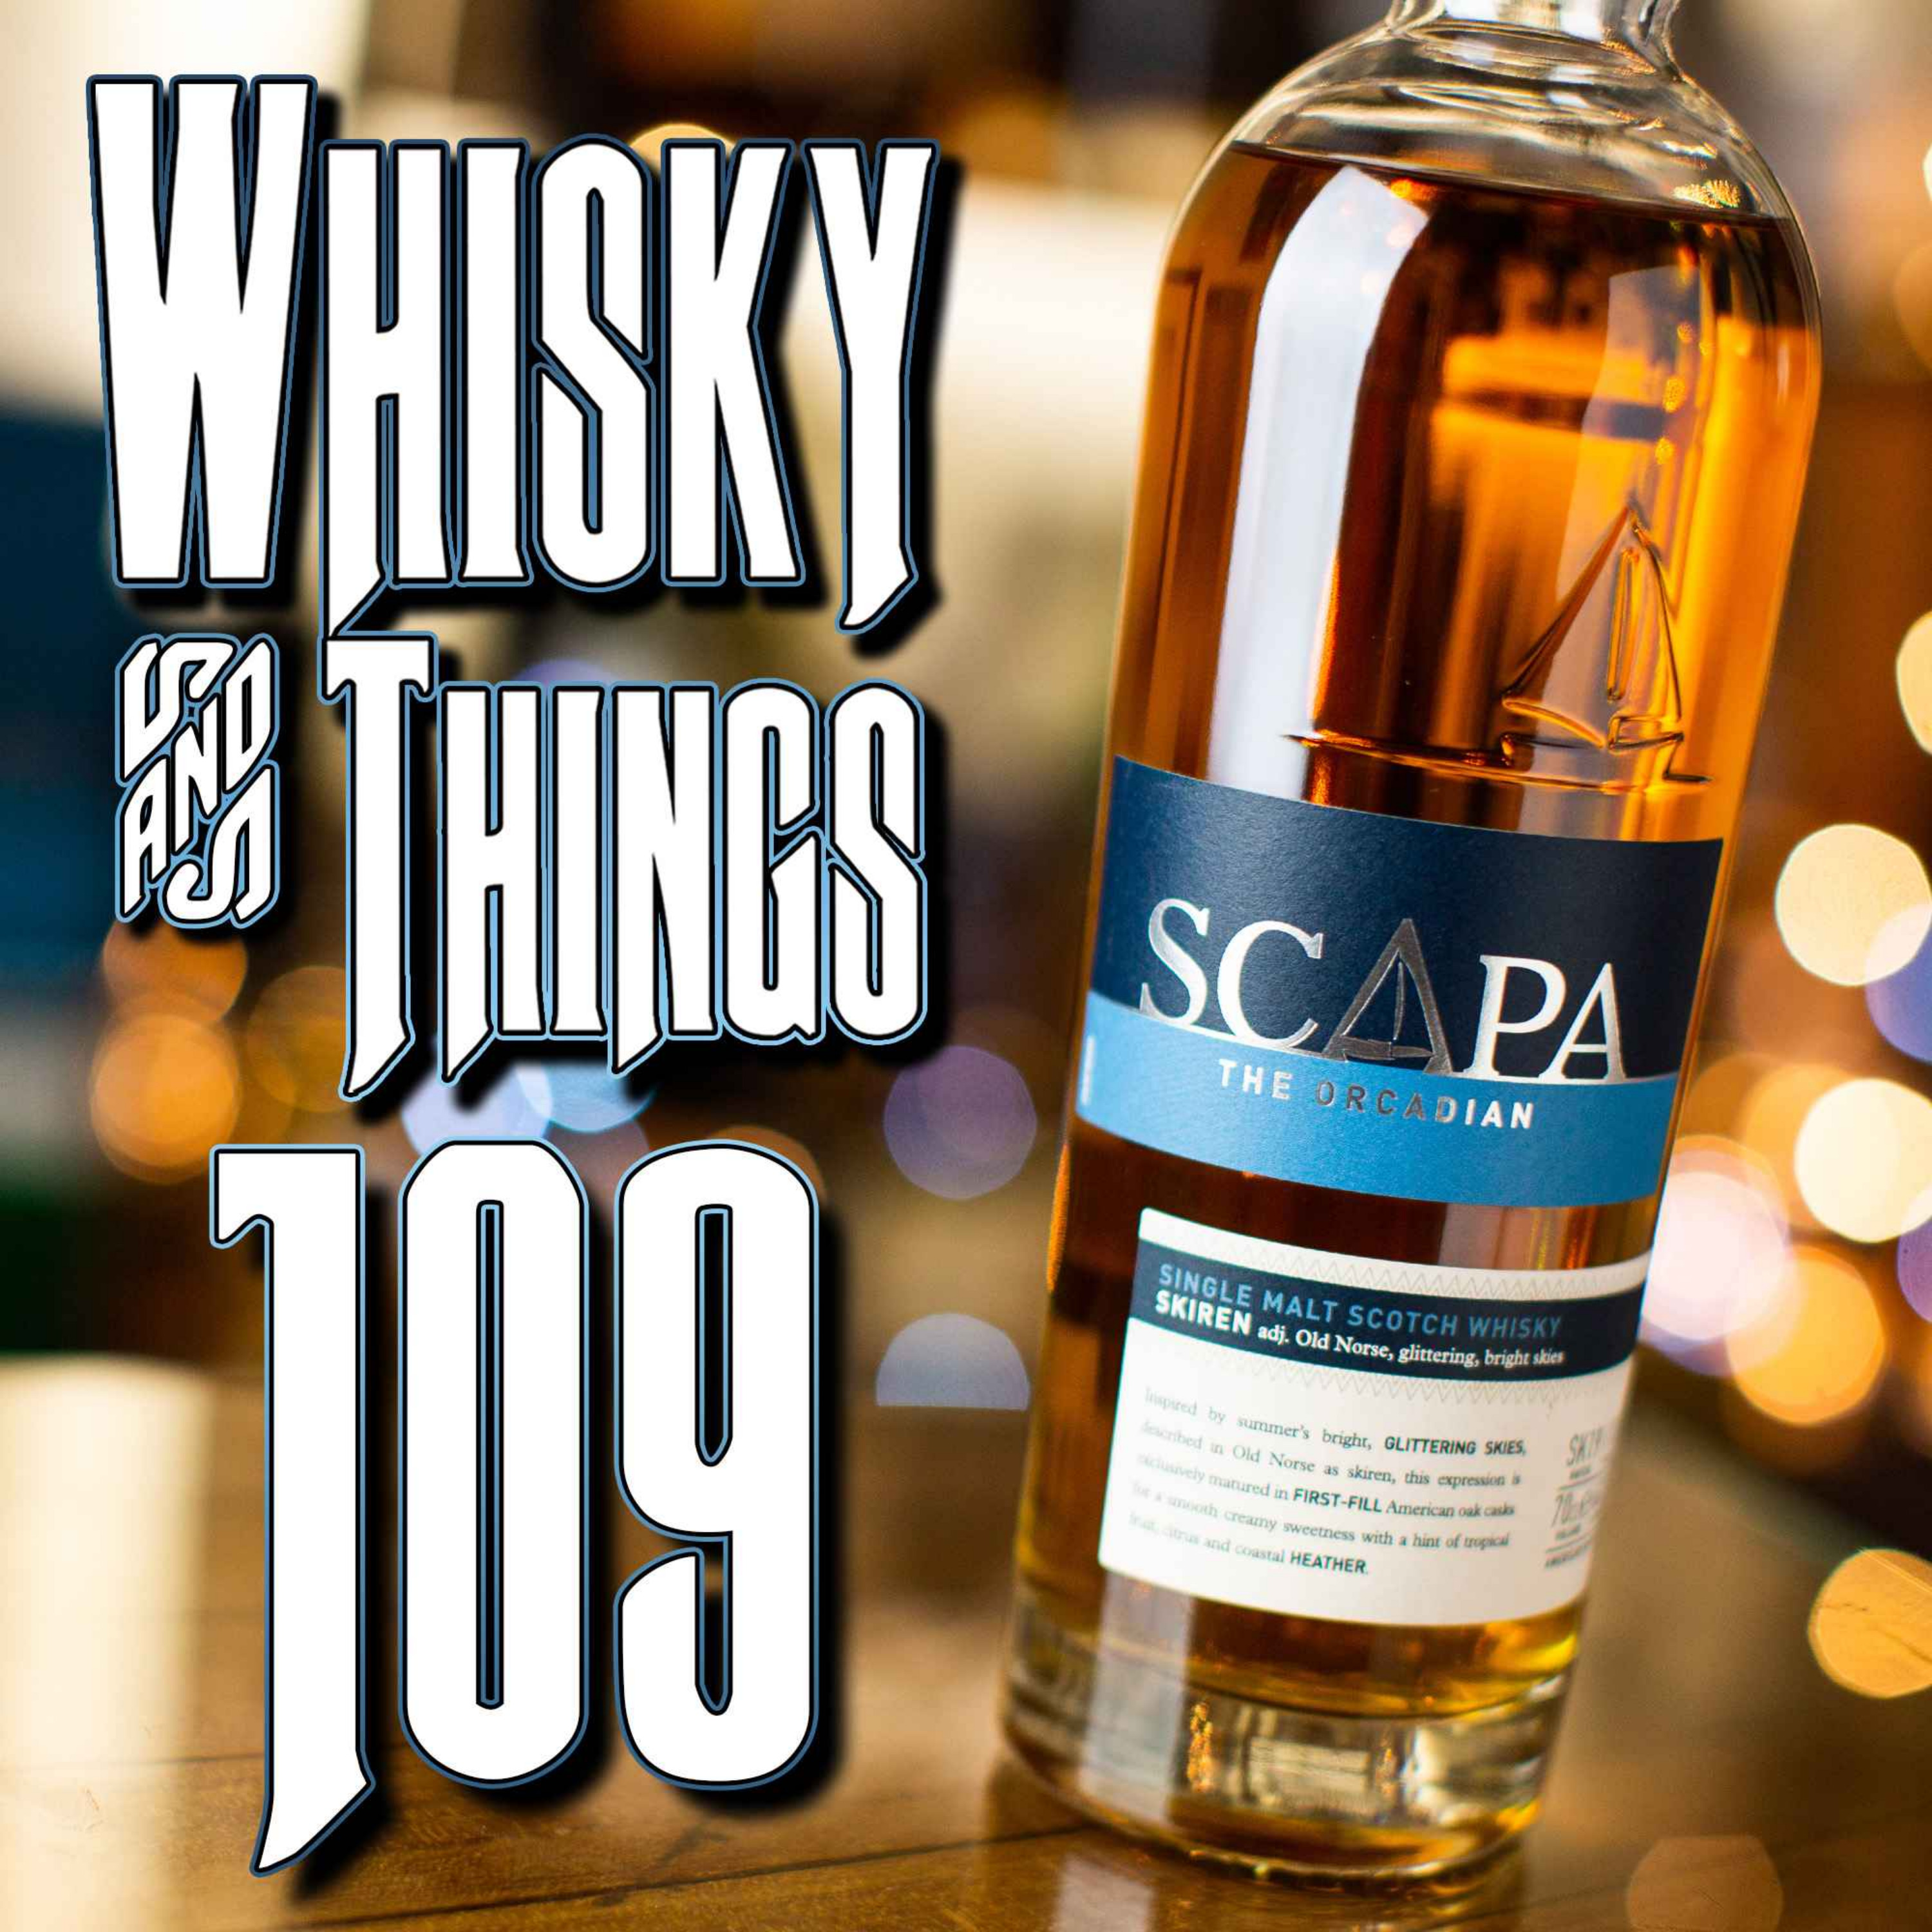 cover art for EP109 SCAPA - THE ORCADIAN - SKIREN SINGLE MALT SCOTCH WHISKY - From the Island of Orkney